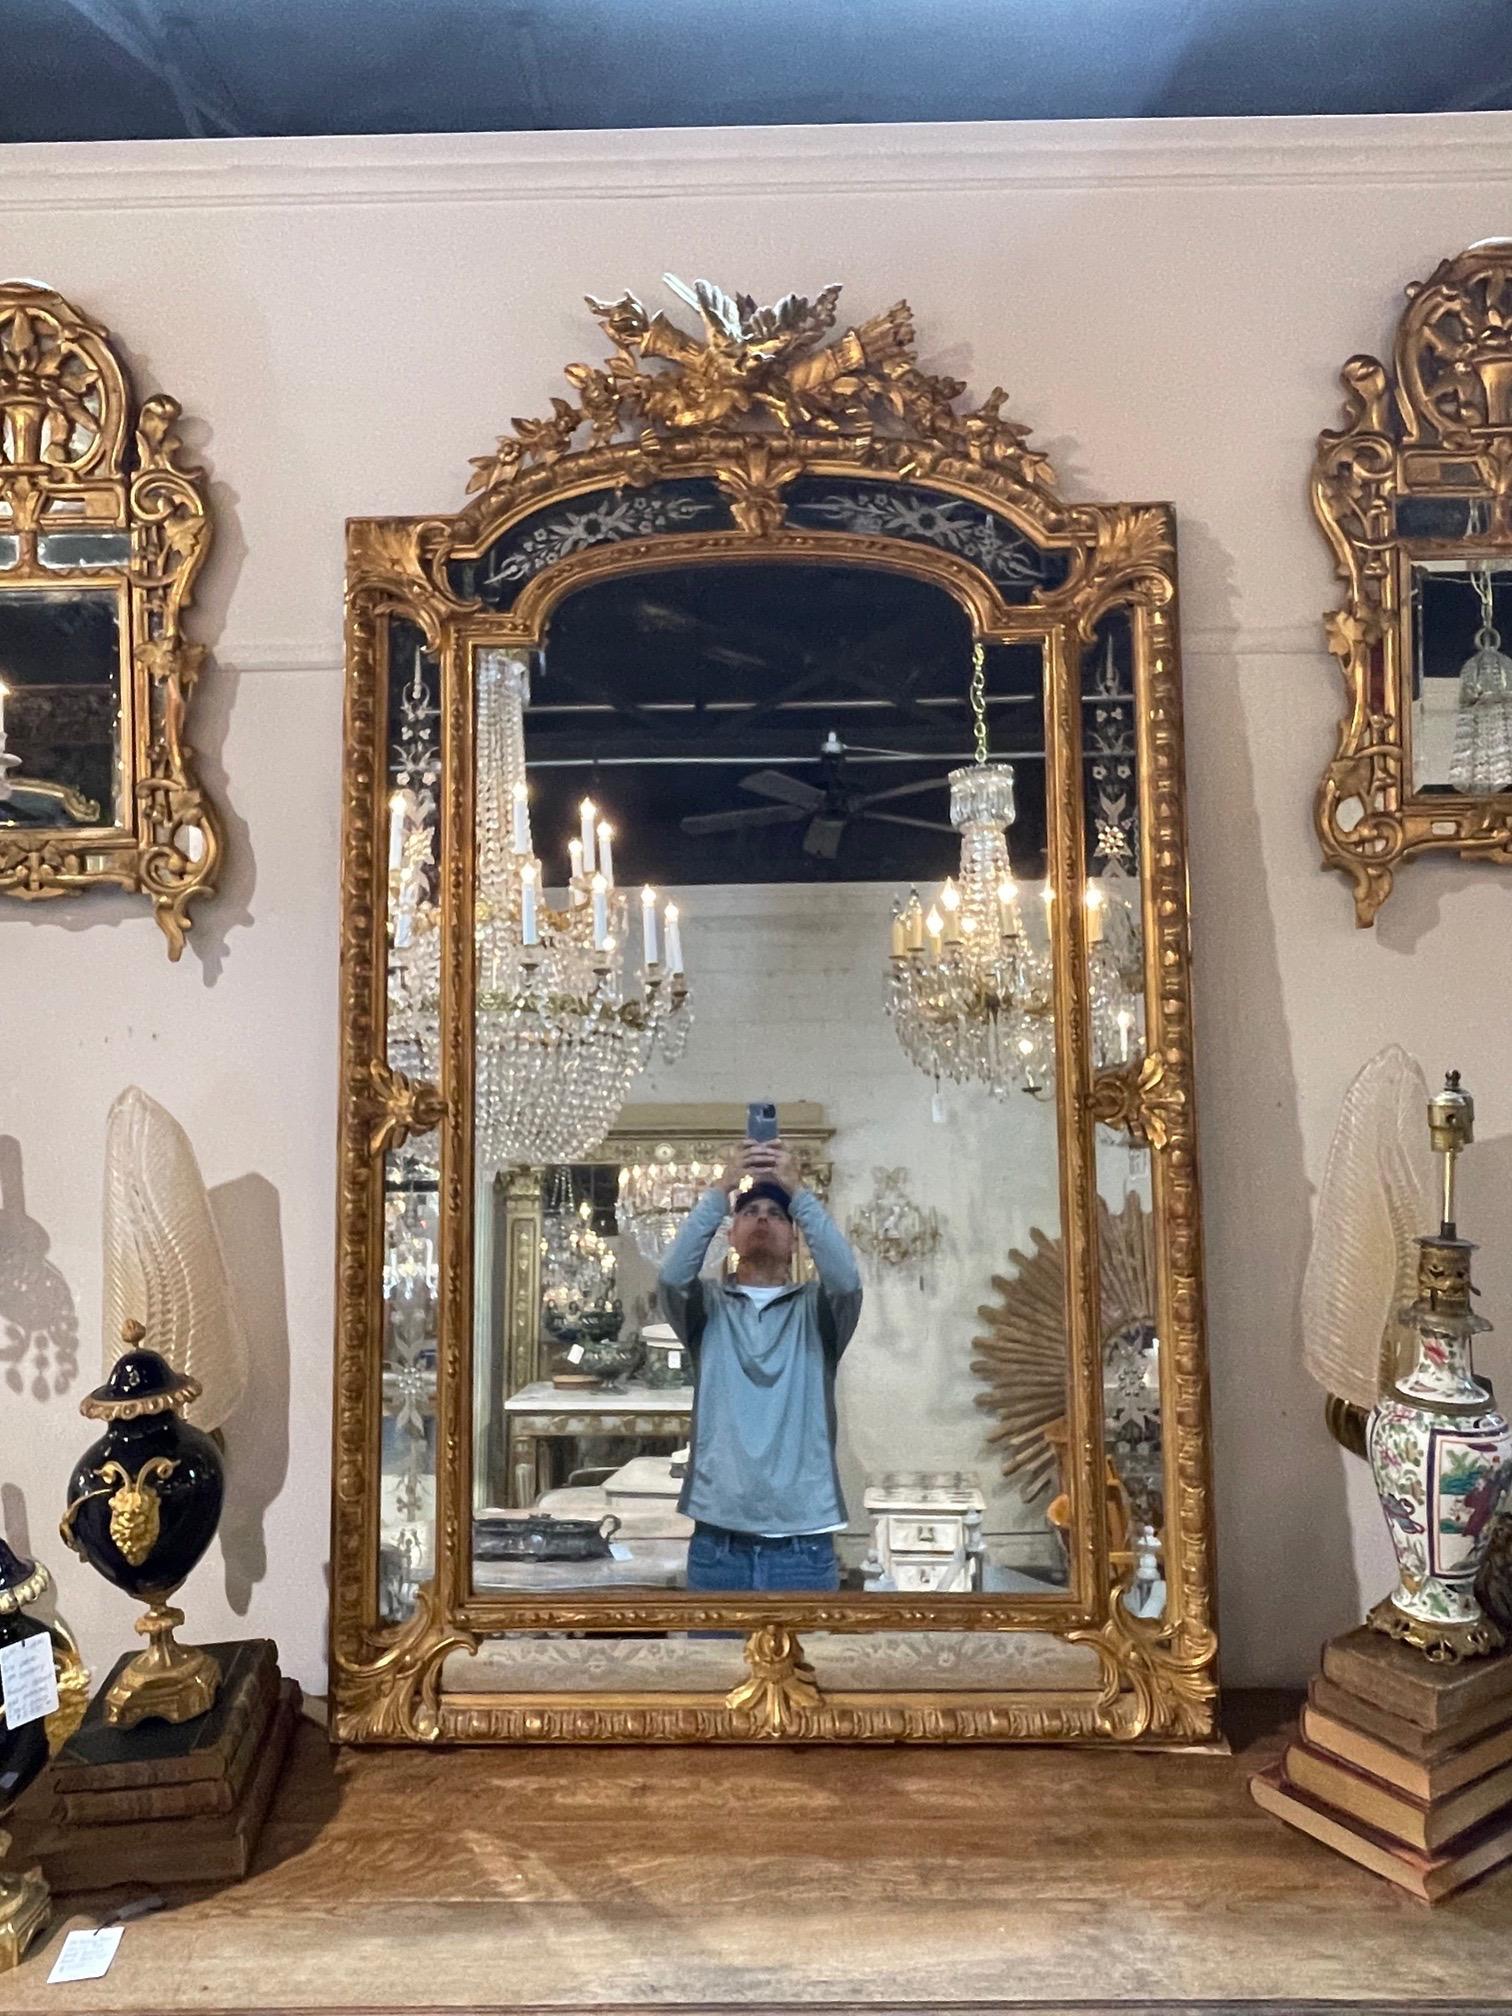 Exquisite 19th century French Louis XVI style carved and giltwood mirror. Beautiful elaborate carvings and very Fine etchings on the outer border make this mirror extra special. Stunning!